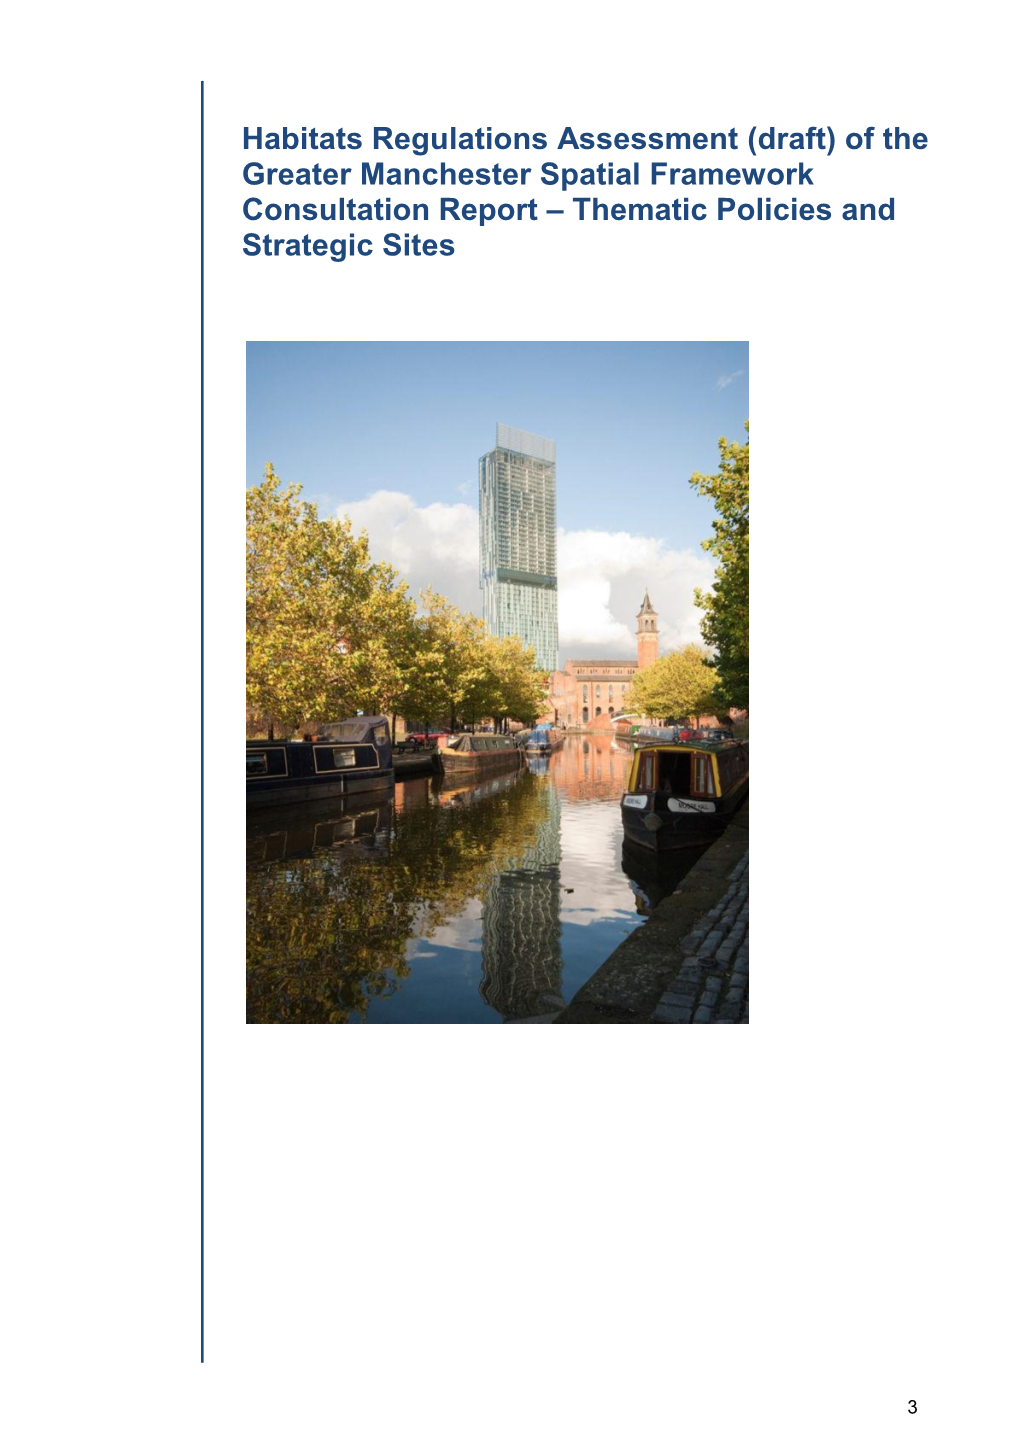 Habitats Regulations Assessment – Thematic Policies and Strategic Sites